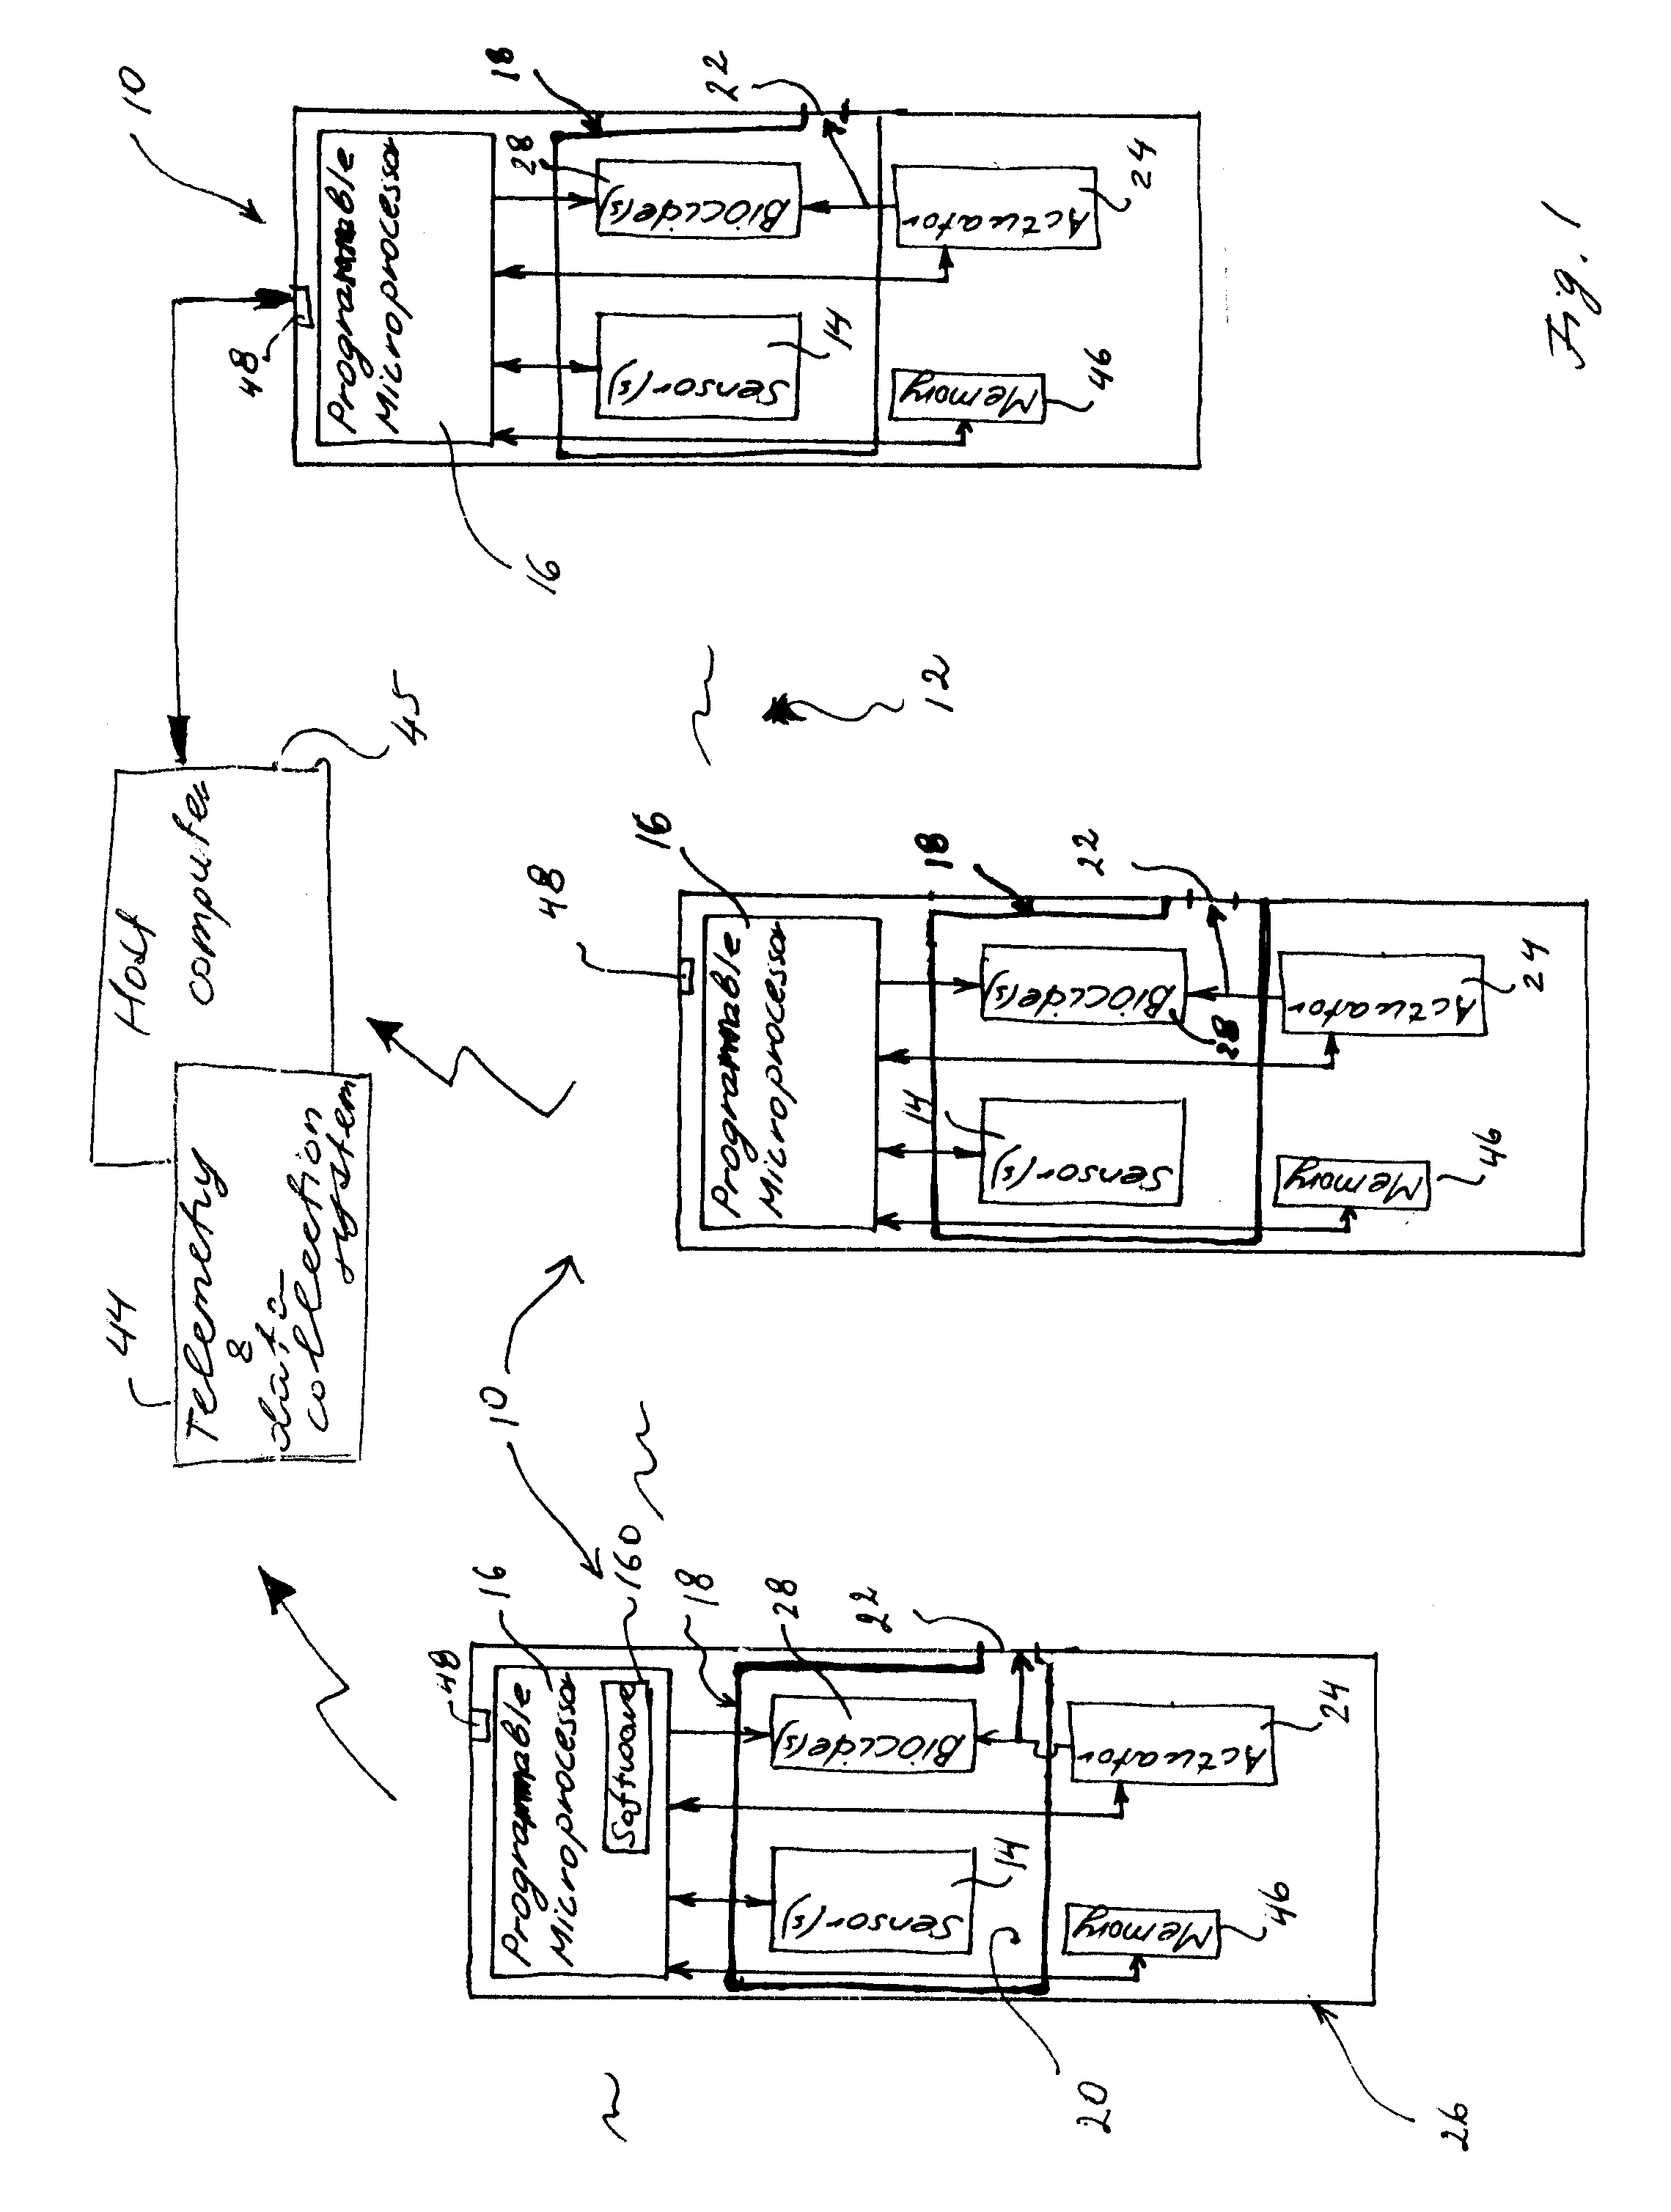 Autonomous device with biofouling control and method for monitoring aquatic environment